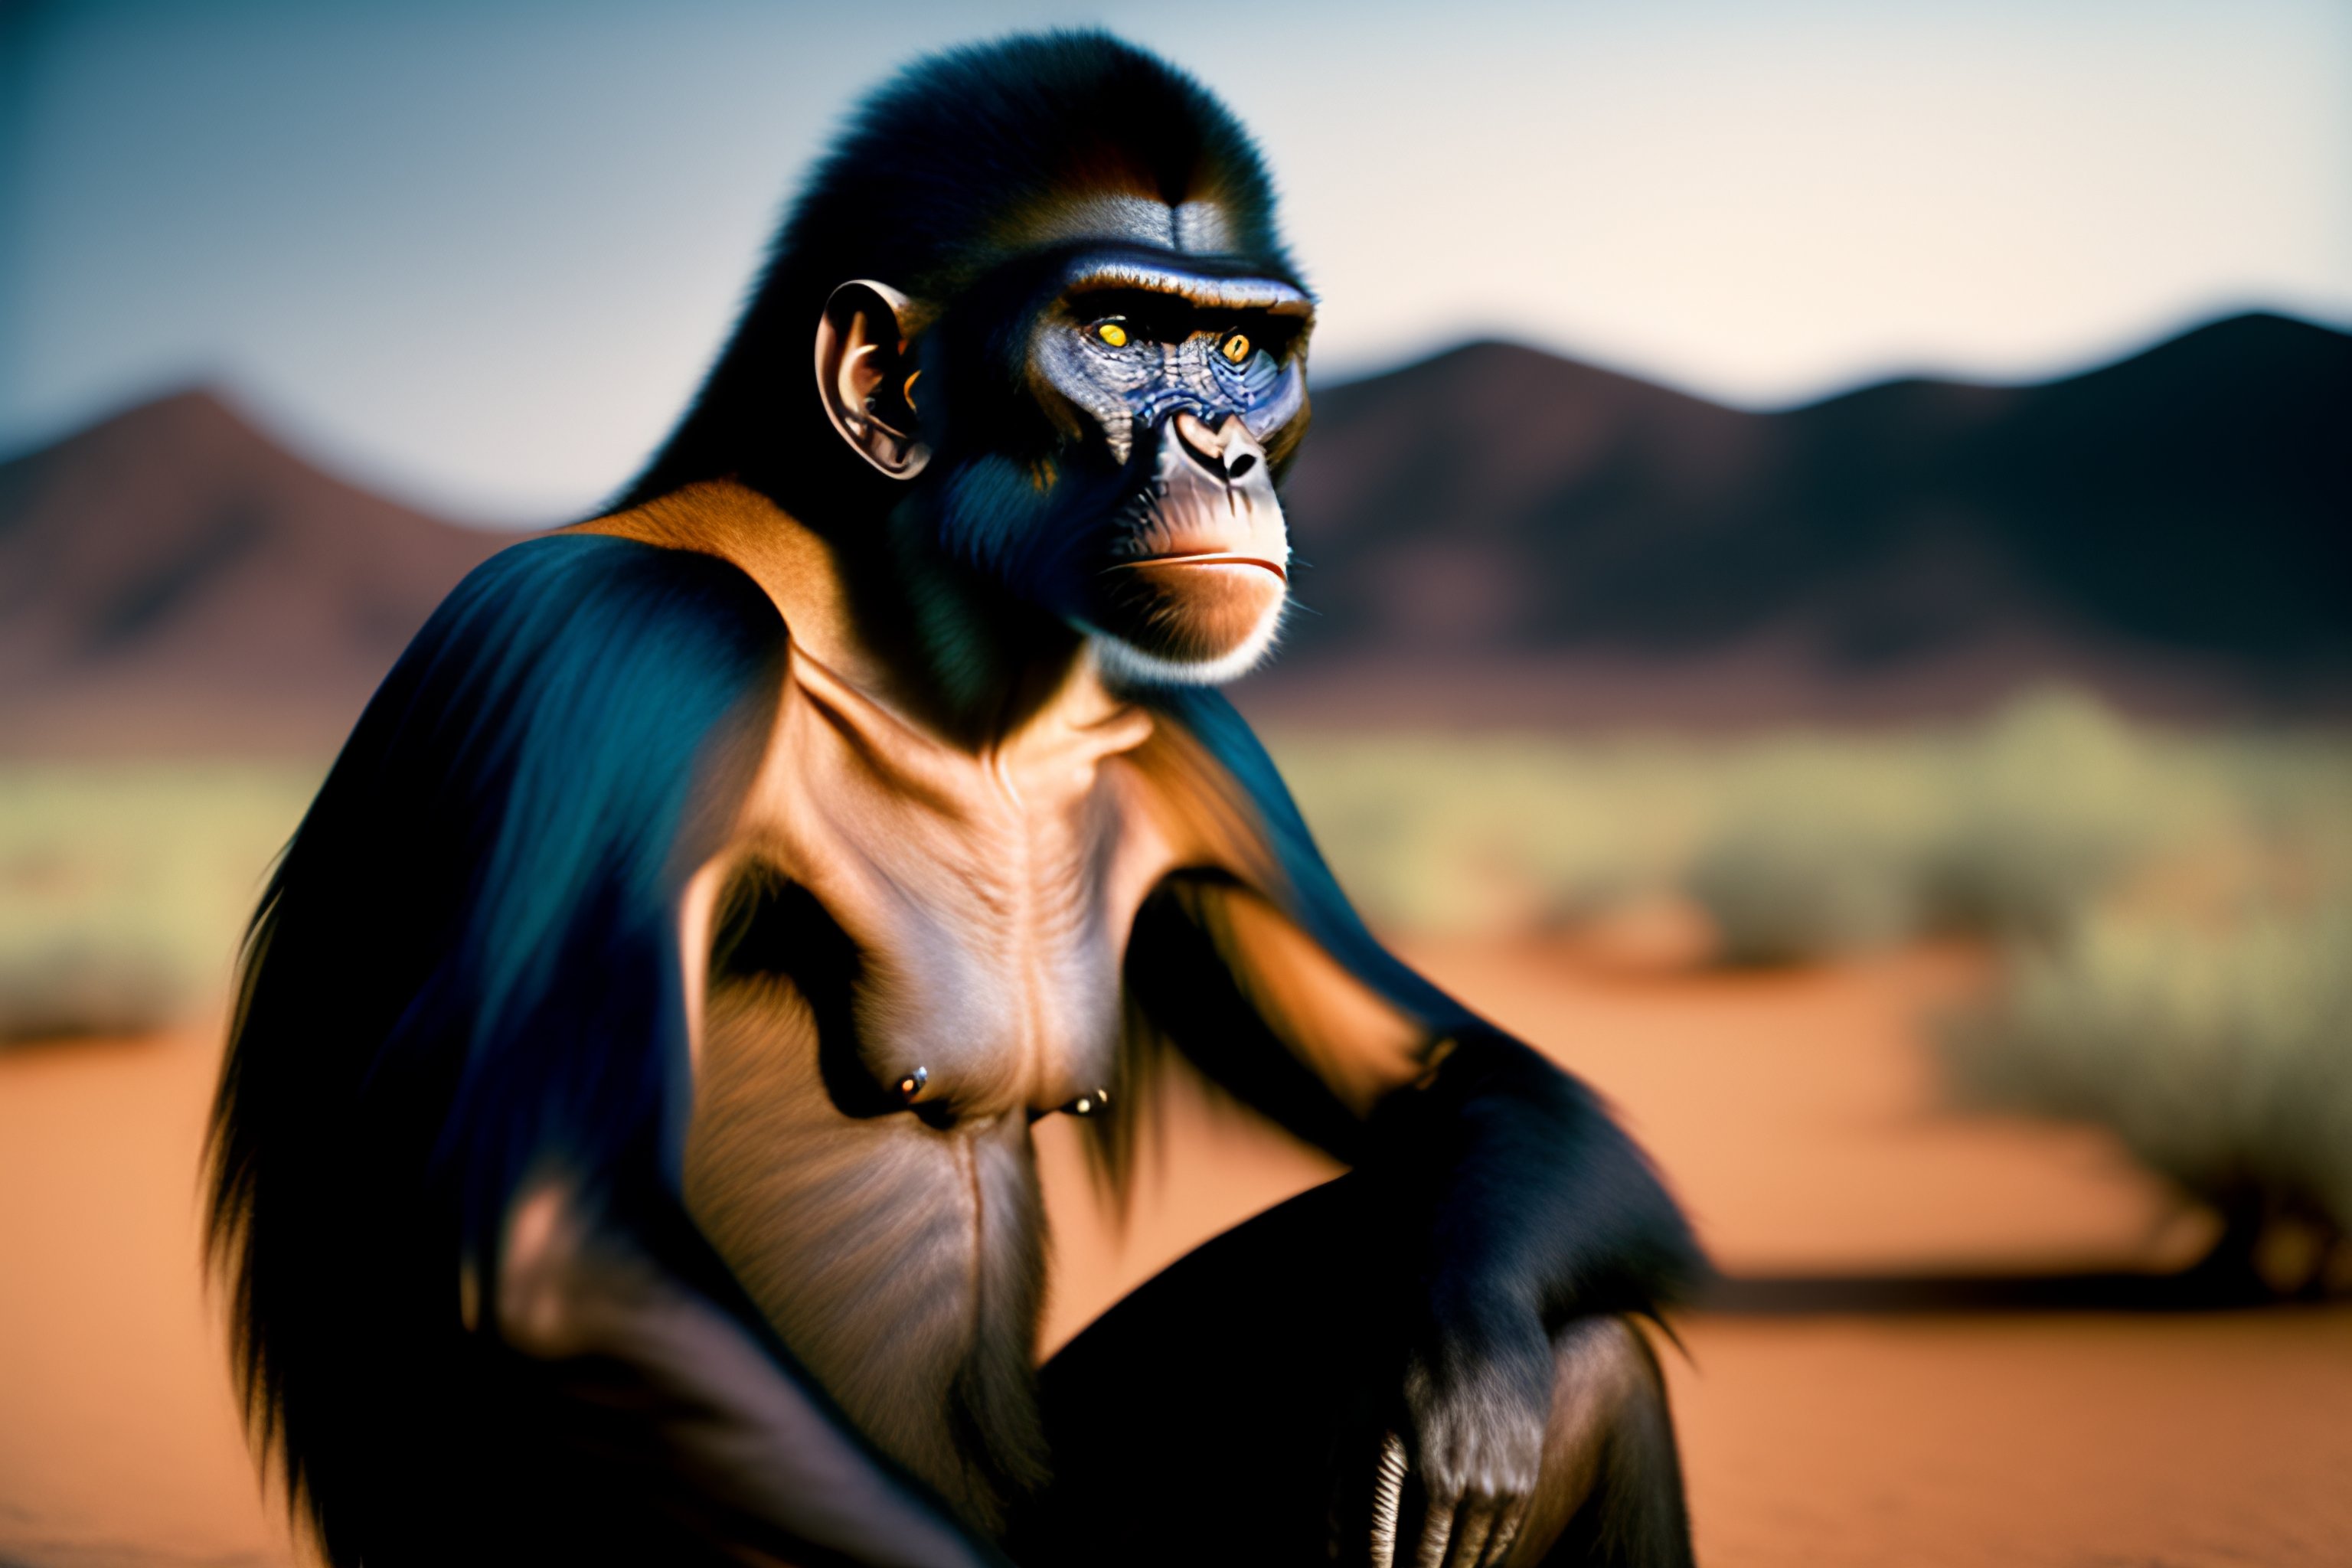 Lexica Full Body Photo Of Lucy The Australopithecus Afarensis Looking Deeply To The Camera